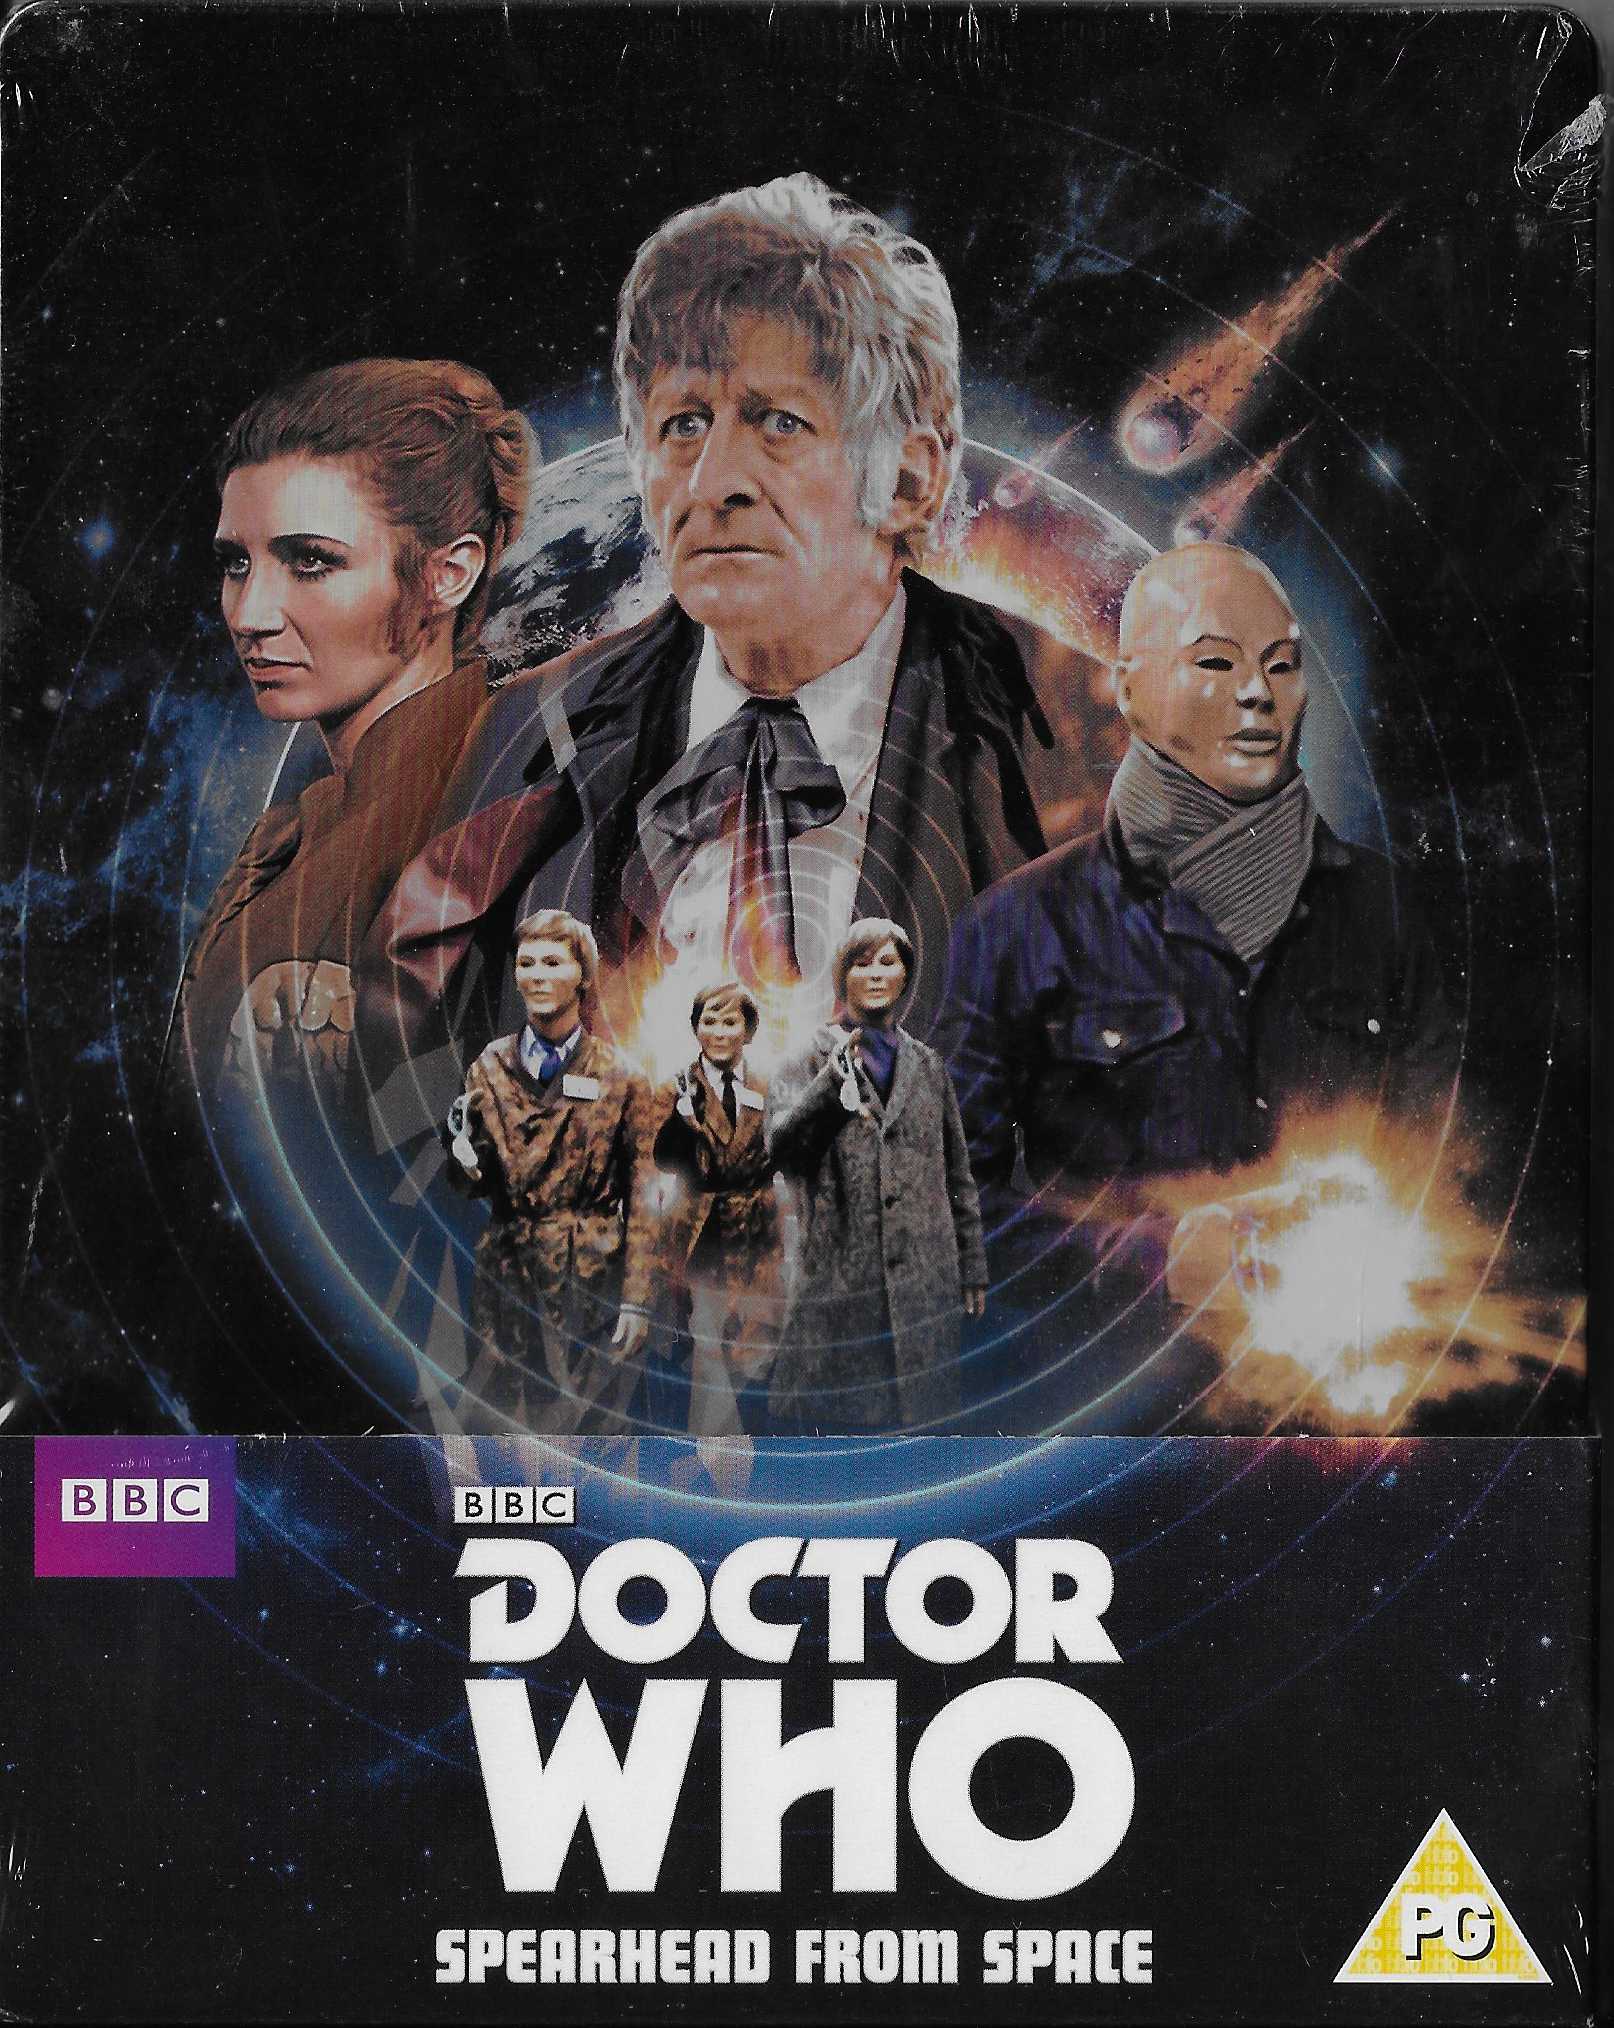 Picture of BBCBD 03444 Doctor Who - Spearhead from space by artist Robert Holmes from the BBC records and Tapes library